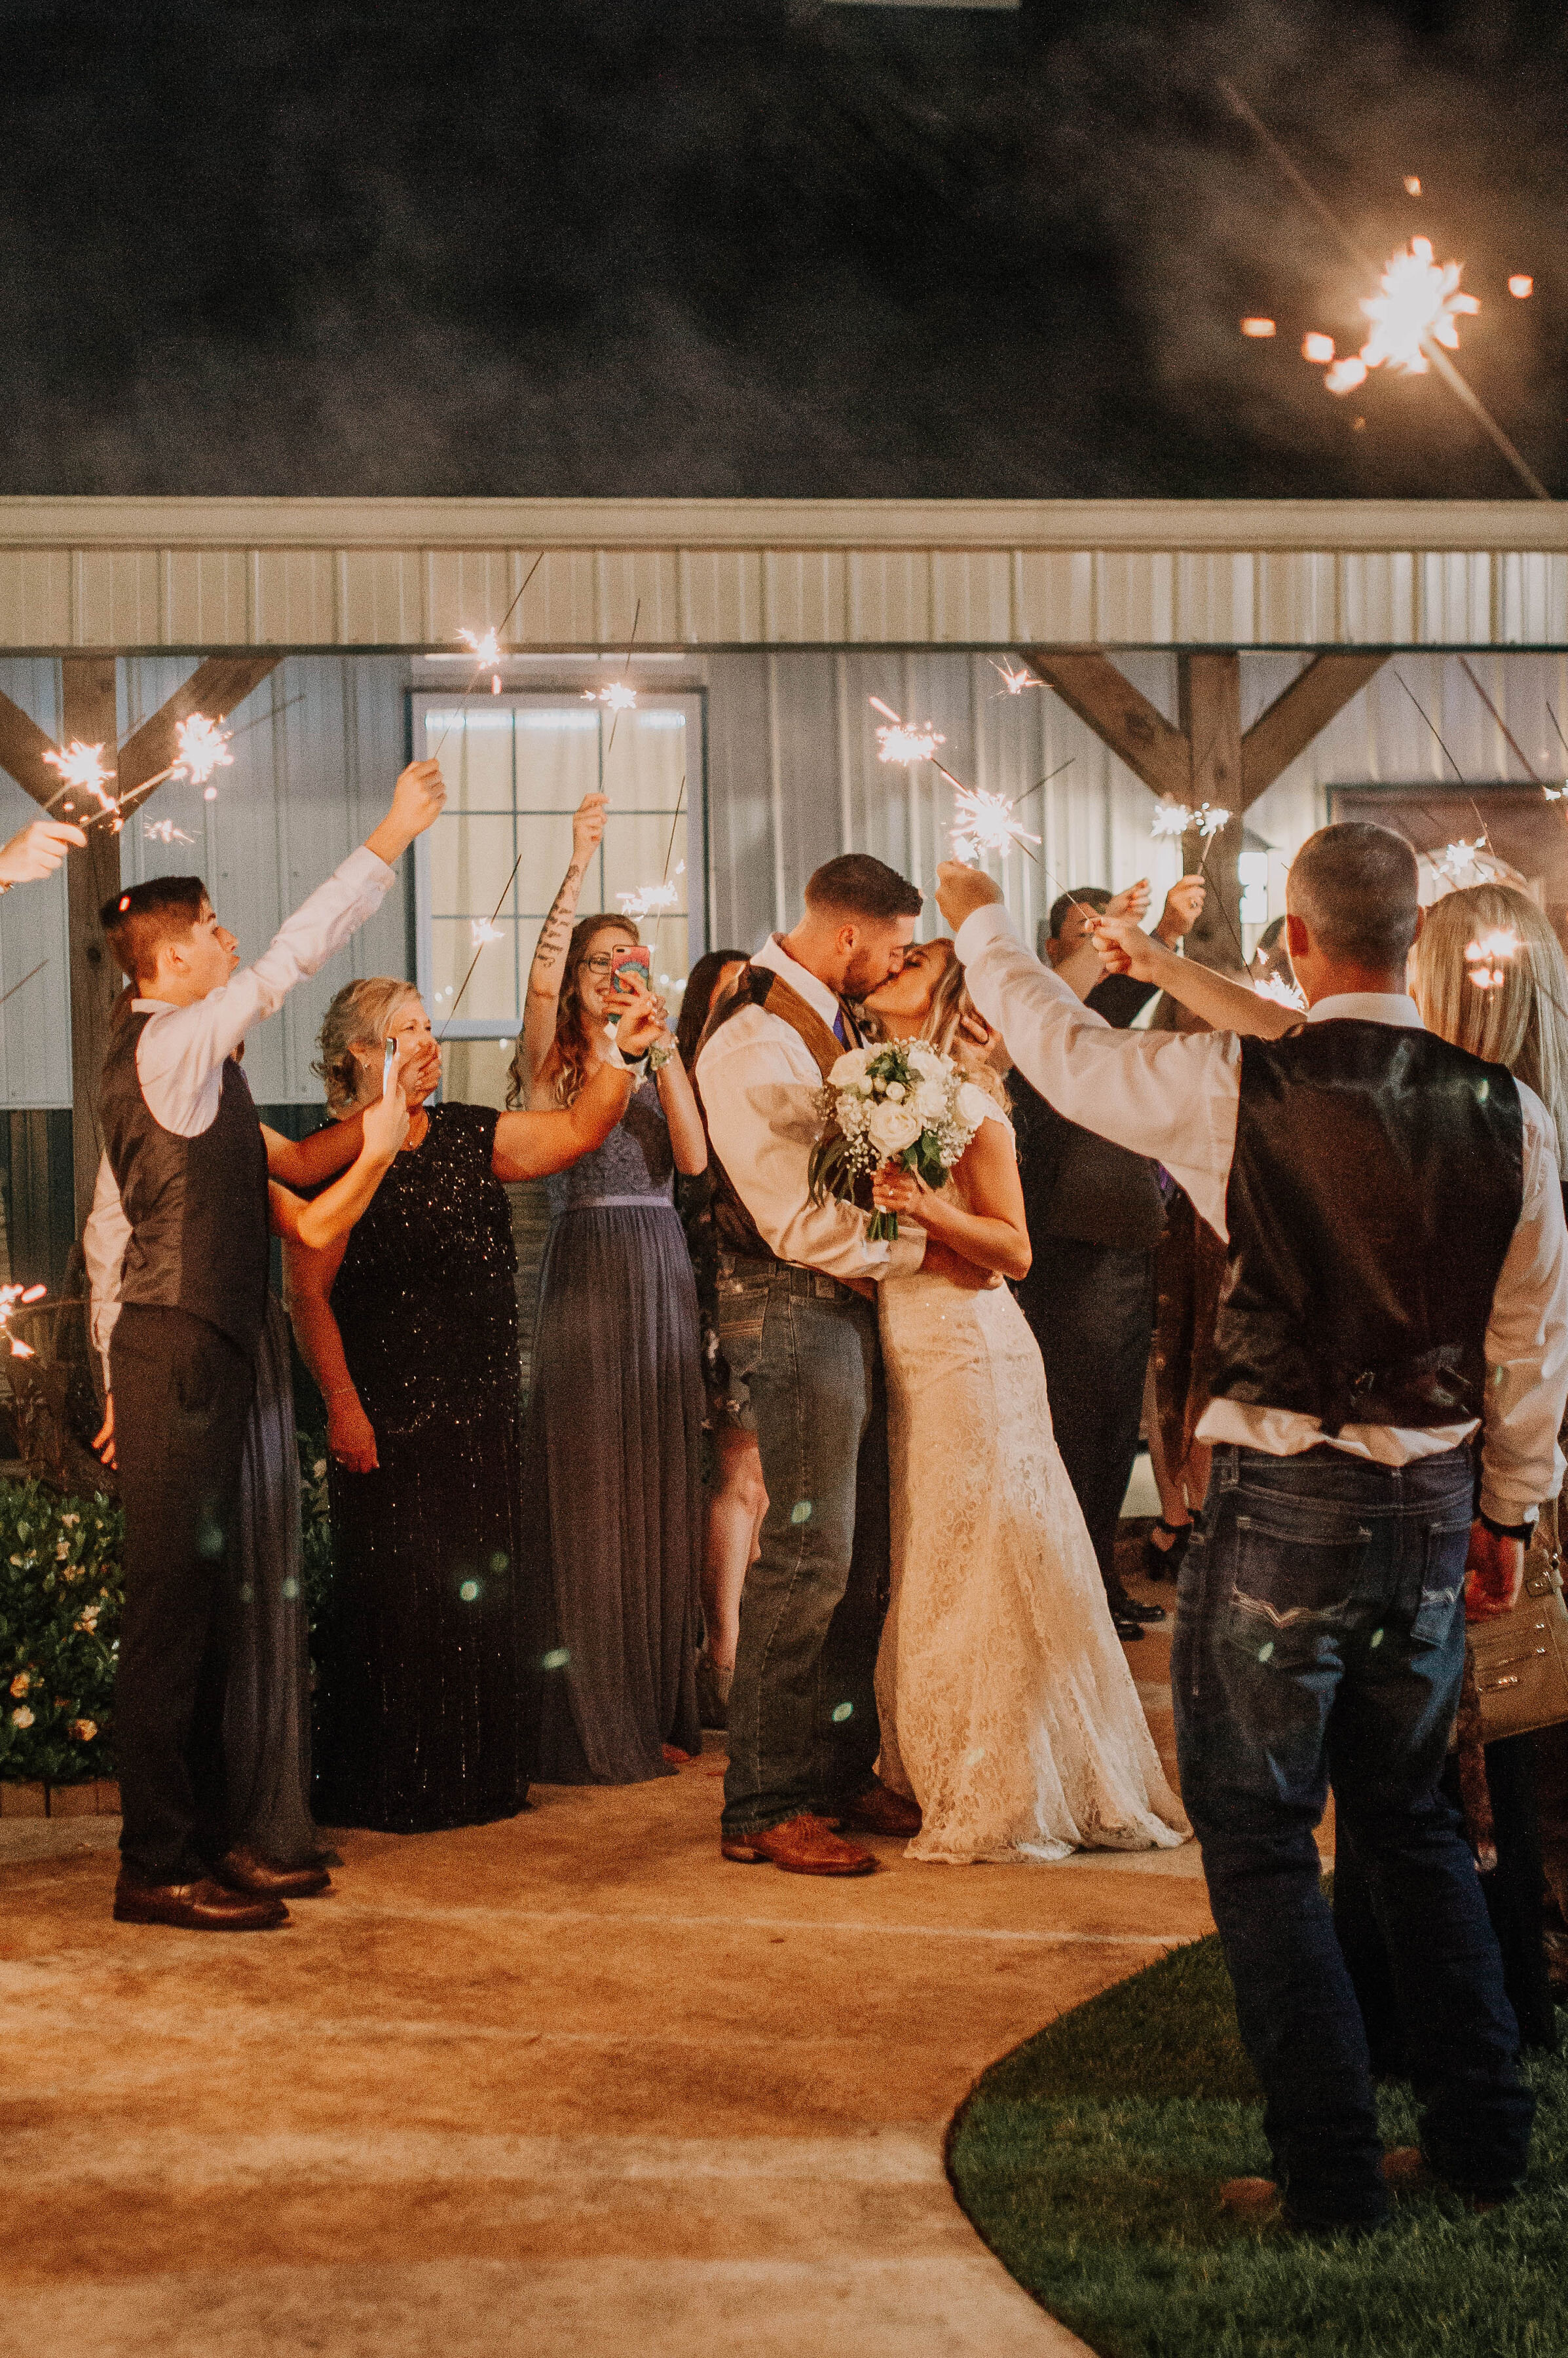 Creative Ideas for a Small Wedding in your Home Town - County Line